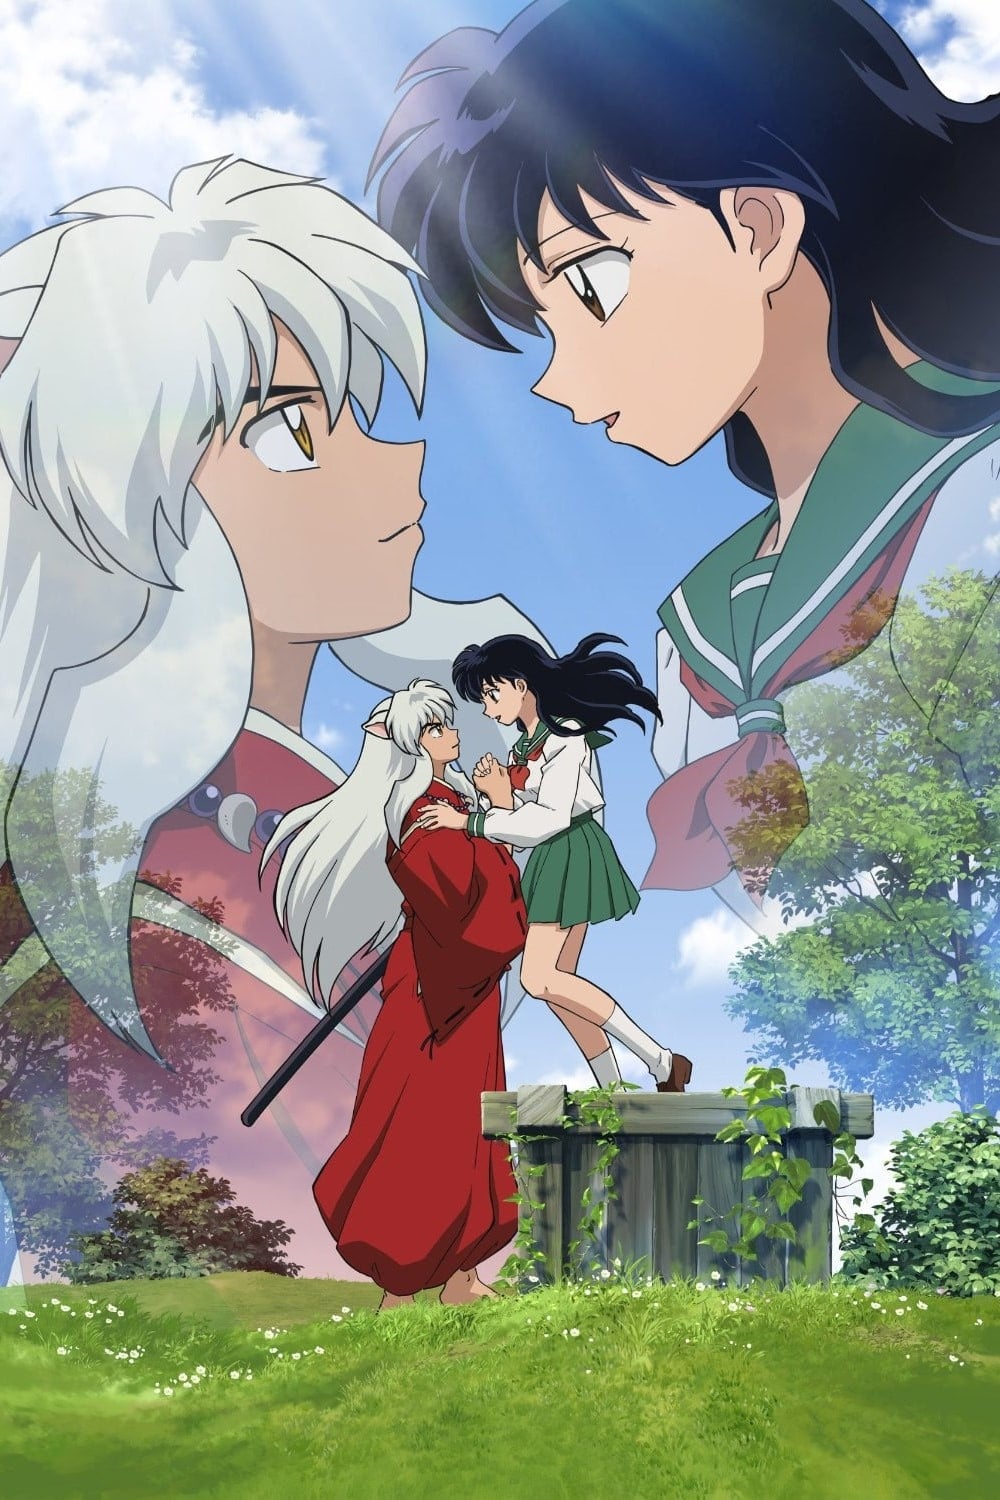 InuYasha (2000)v2A34 TV Series High Quality Glossy Paper A1 A2 A3 A4 A3 Framed or Unframed!!!